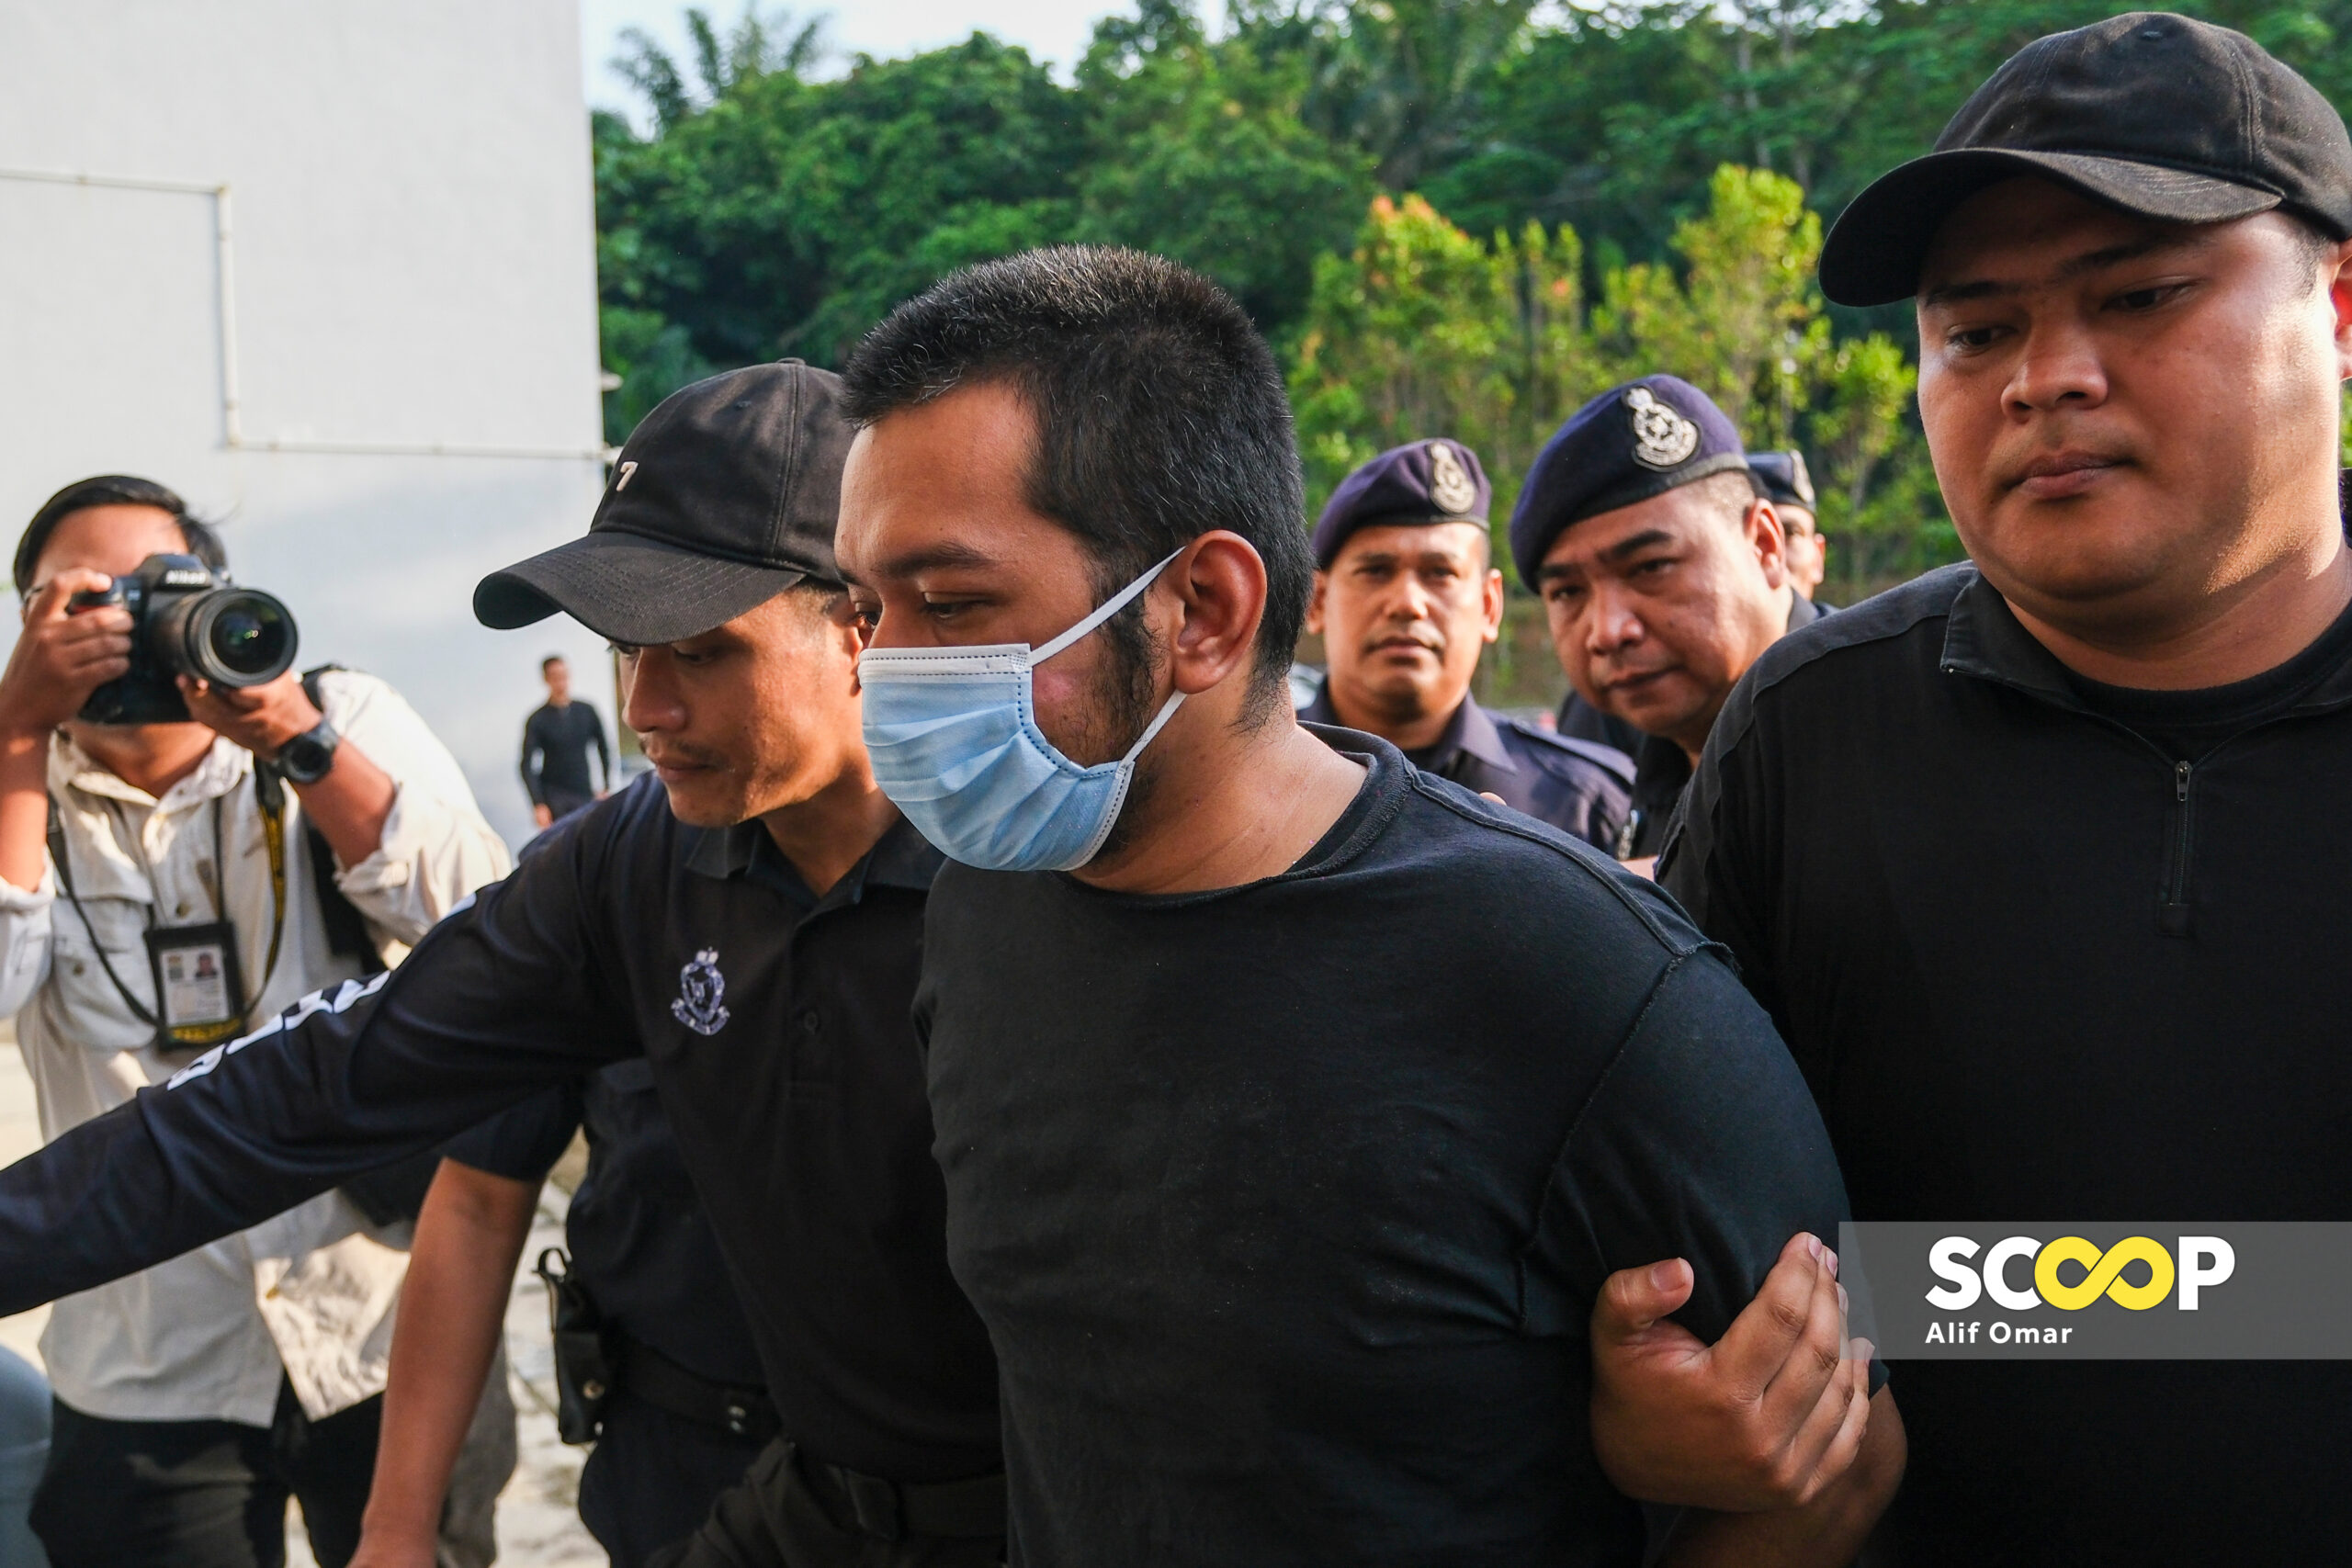 [UPDATED] KLIA shooting suspect pleads not guilty to attempted murder charge